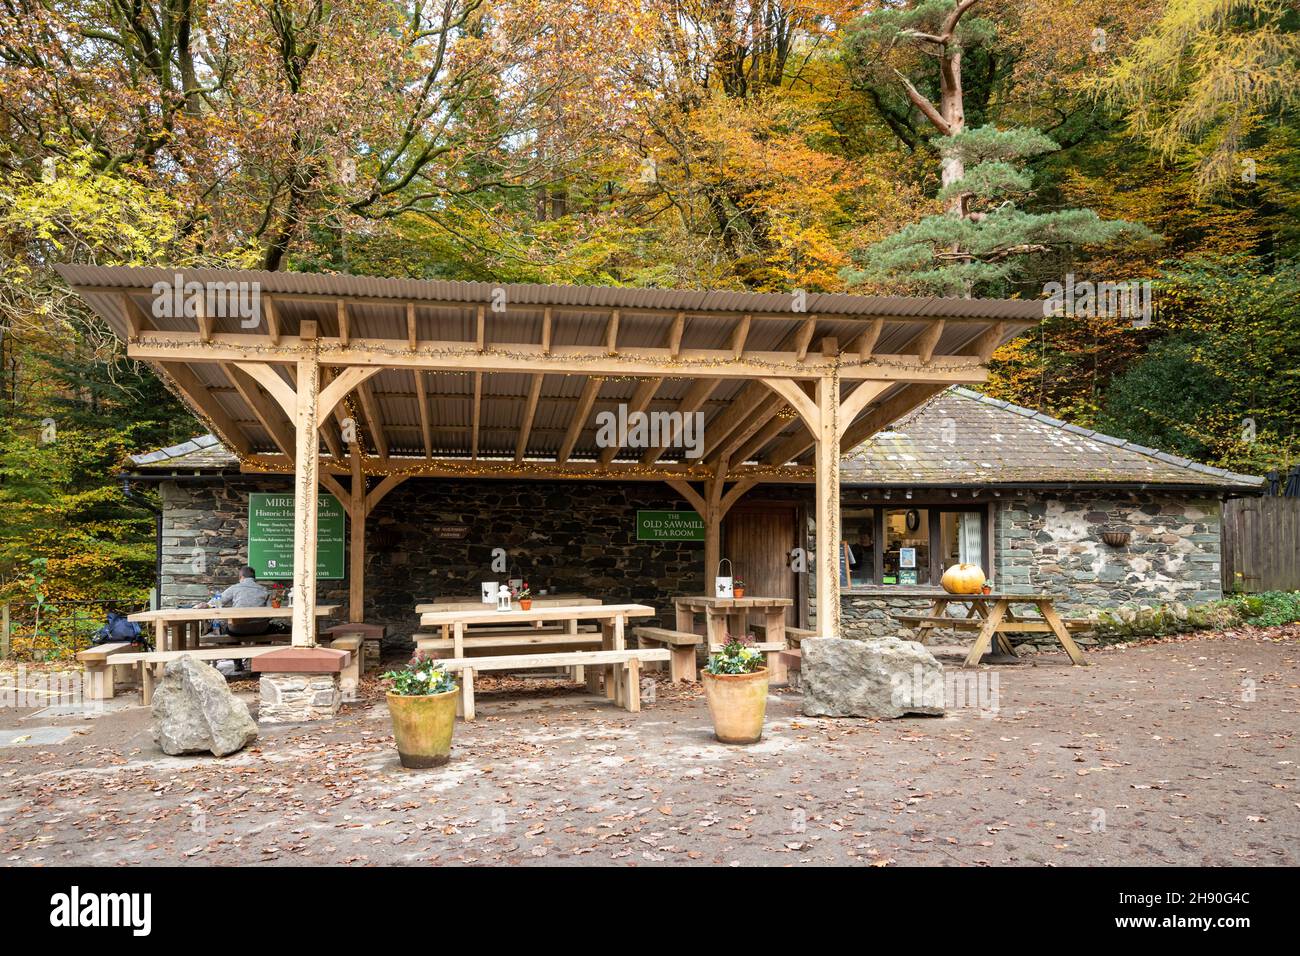 The Old Sawmill Tea Room at Dodd Wood beside Bassenthwaite Lake in Cumbria, England, UK, during autumn or November Stock Photo